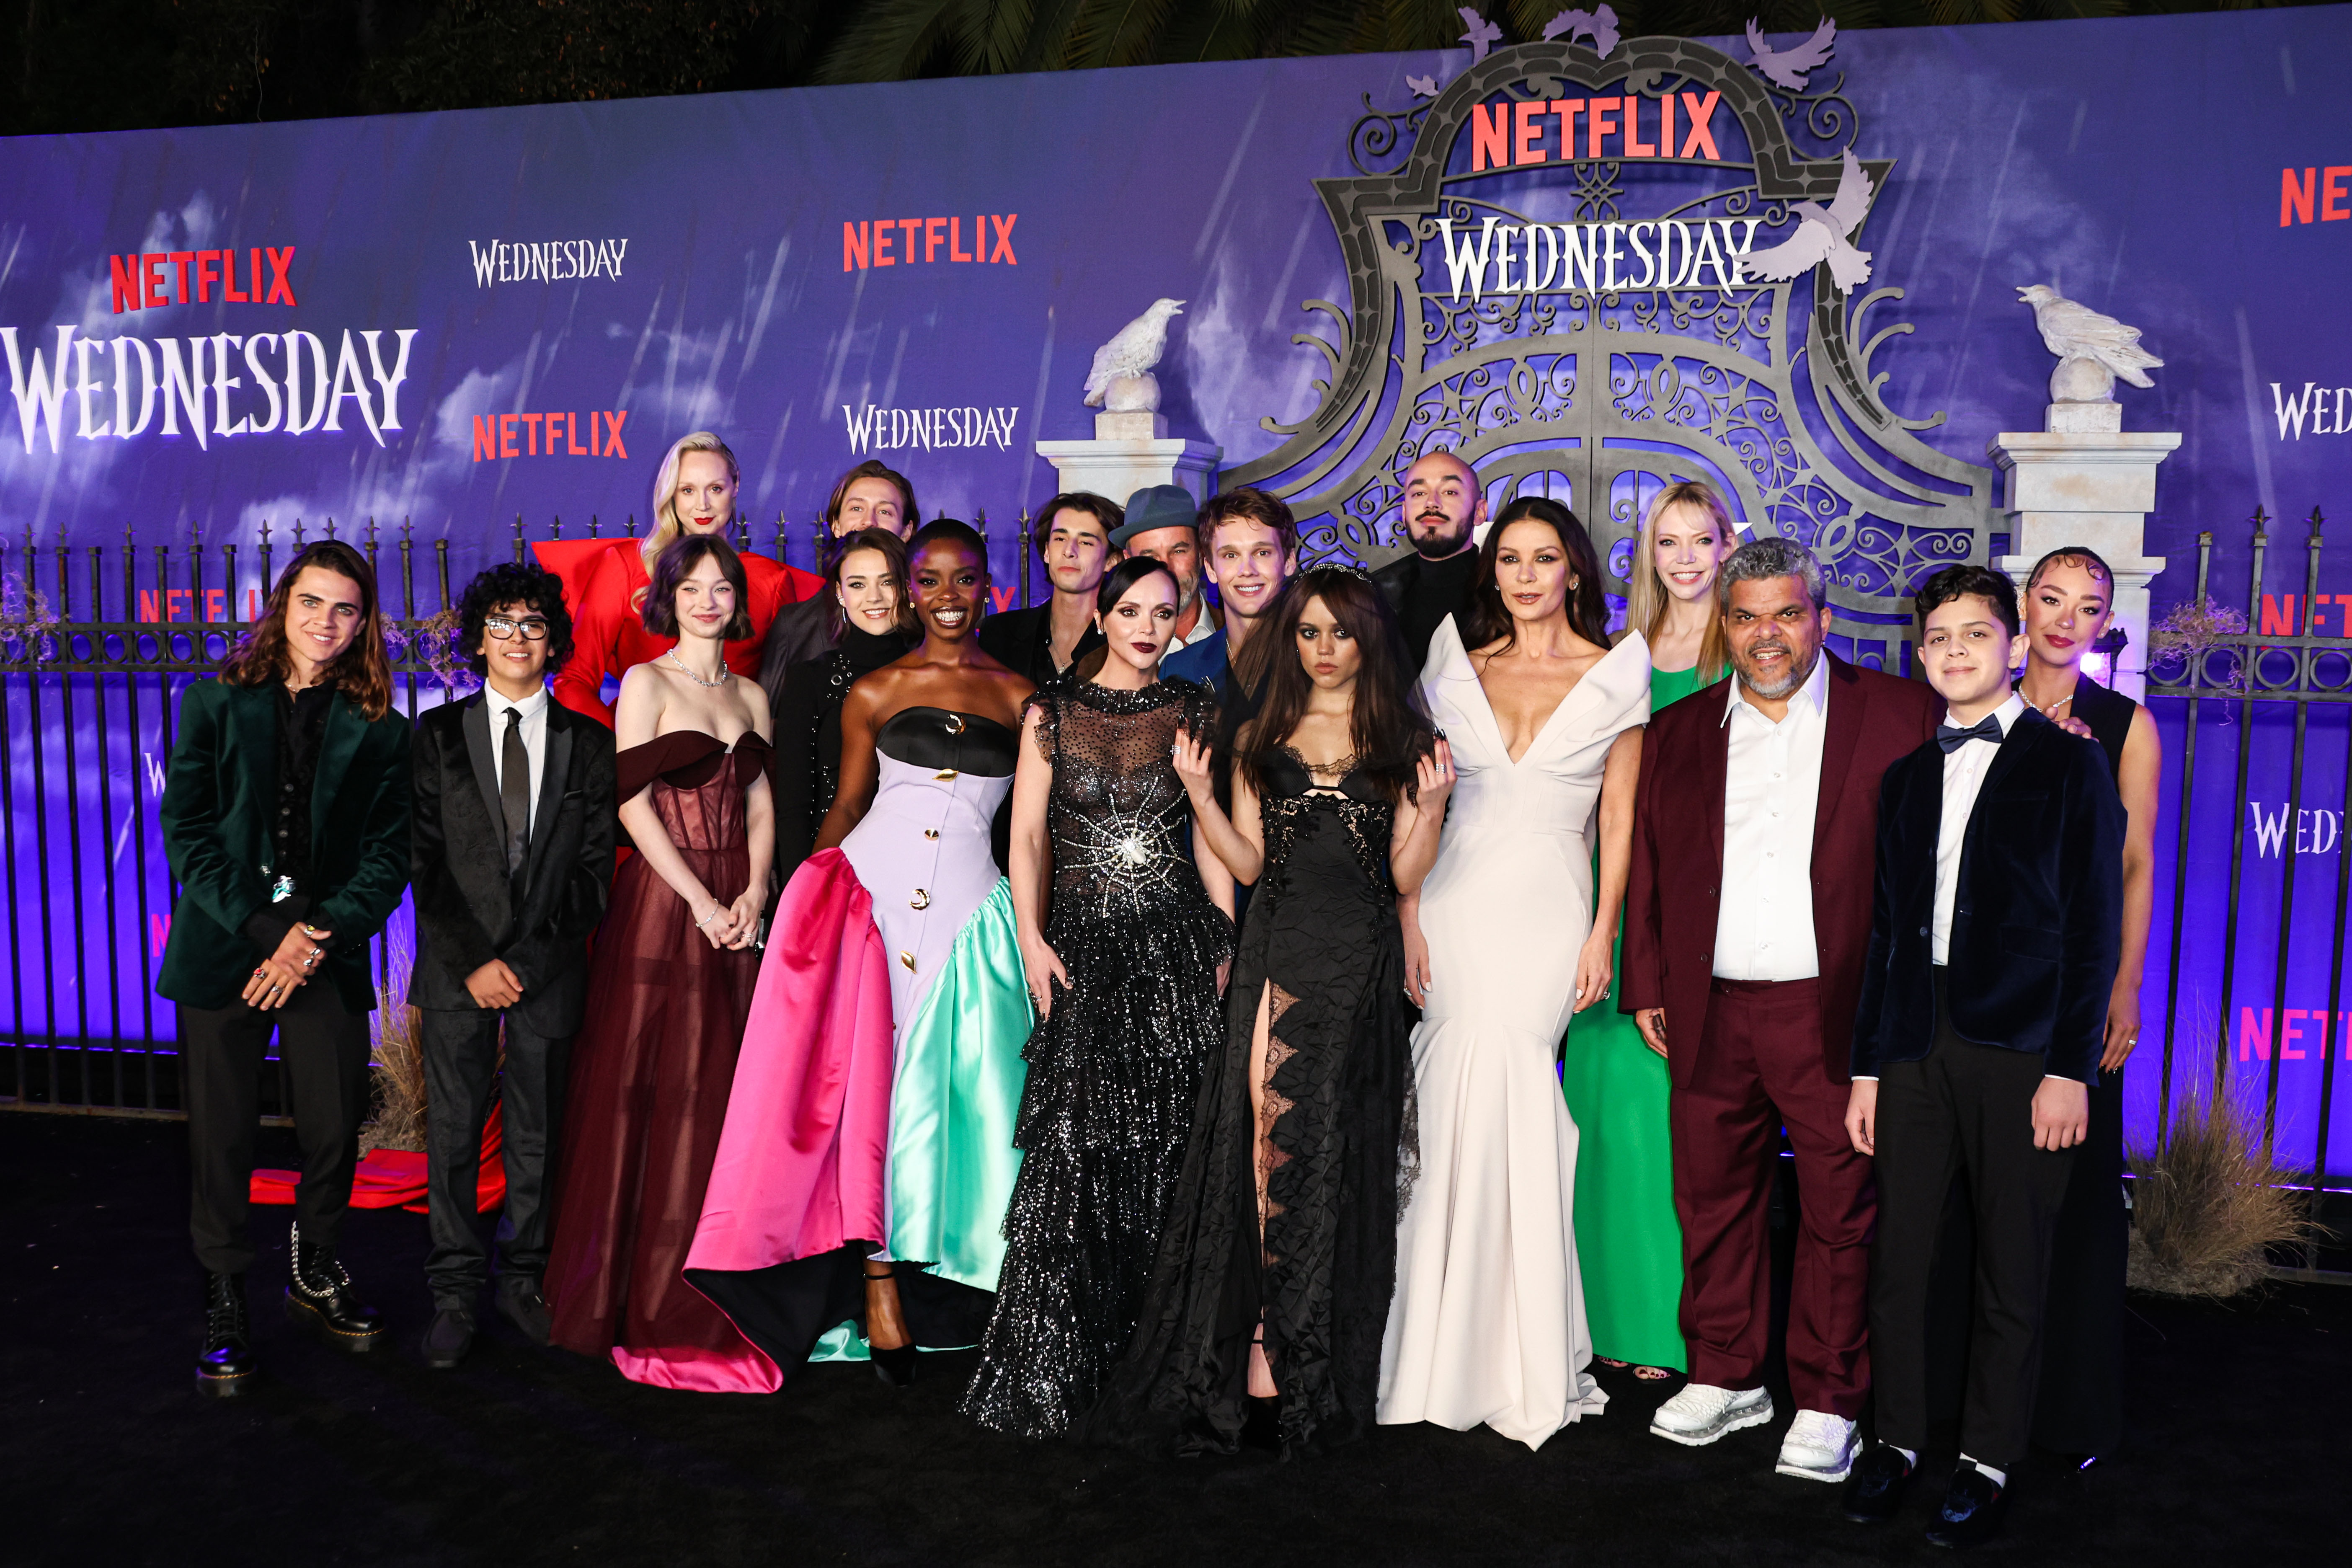 Wednesday cast: Who stars in Netflix series?